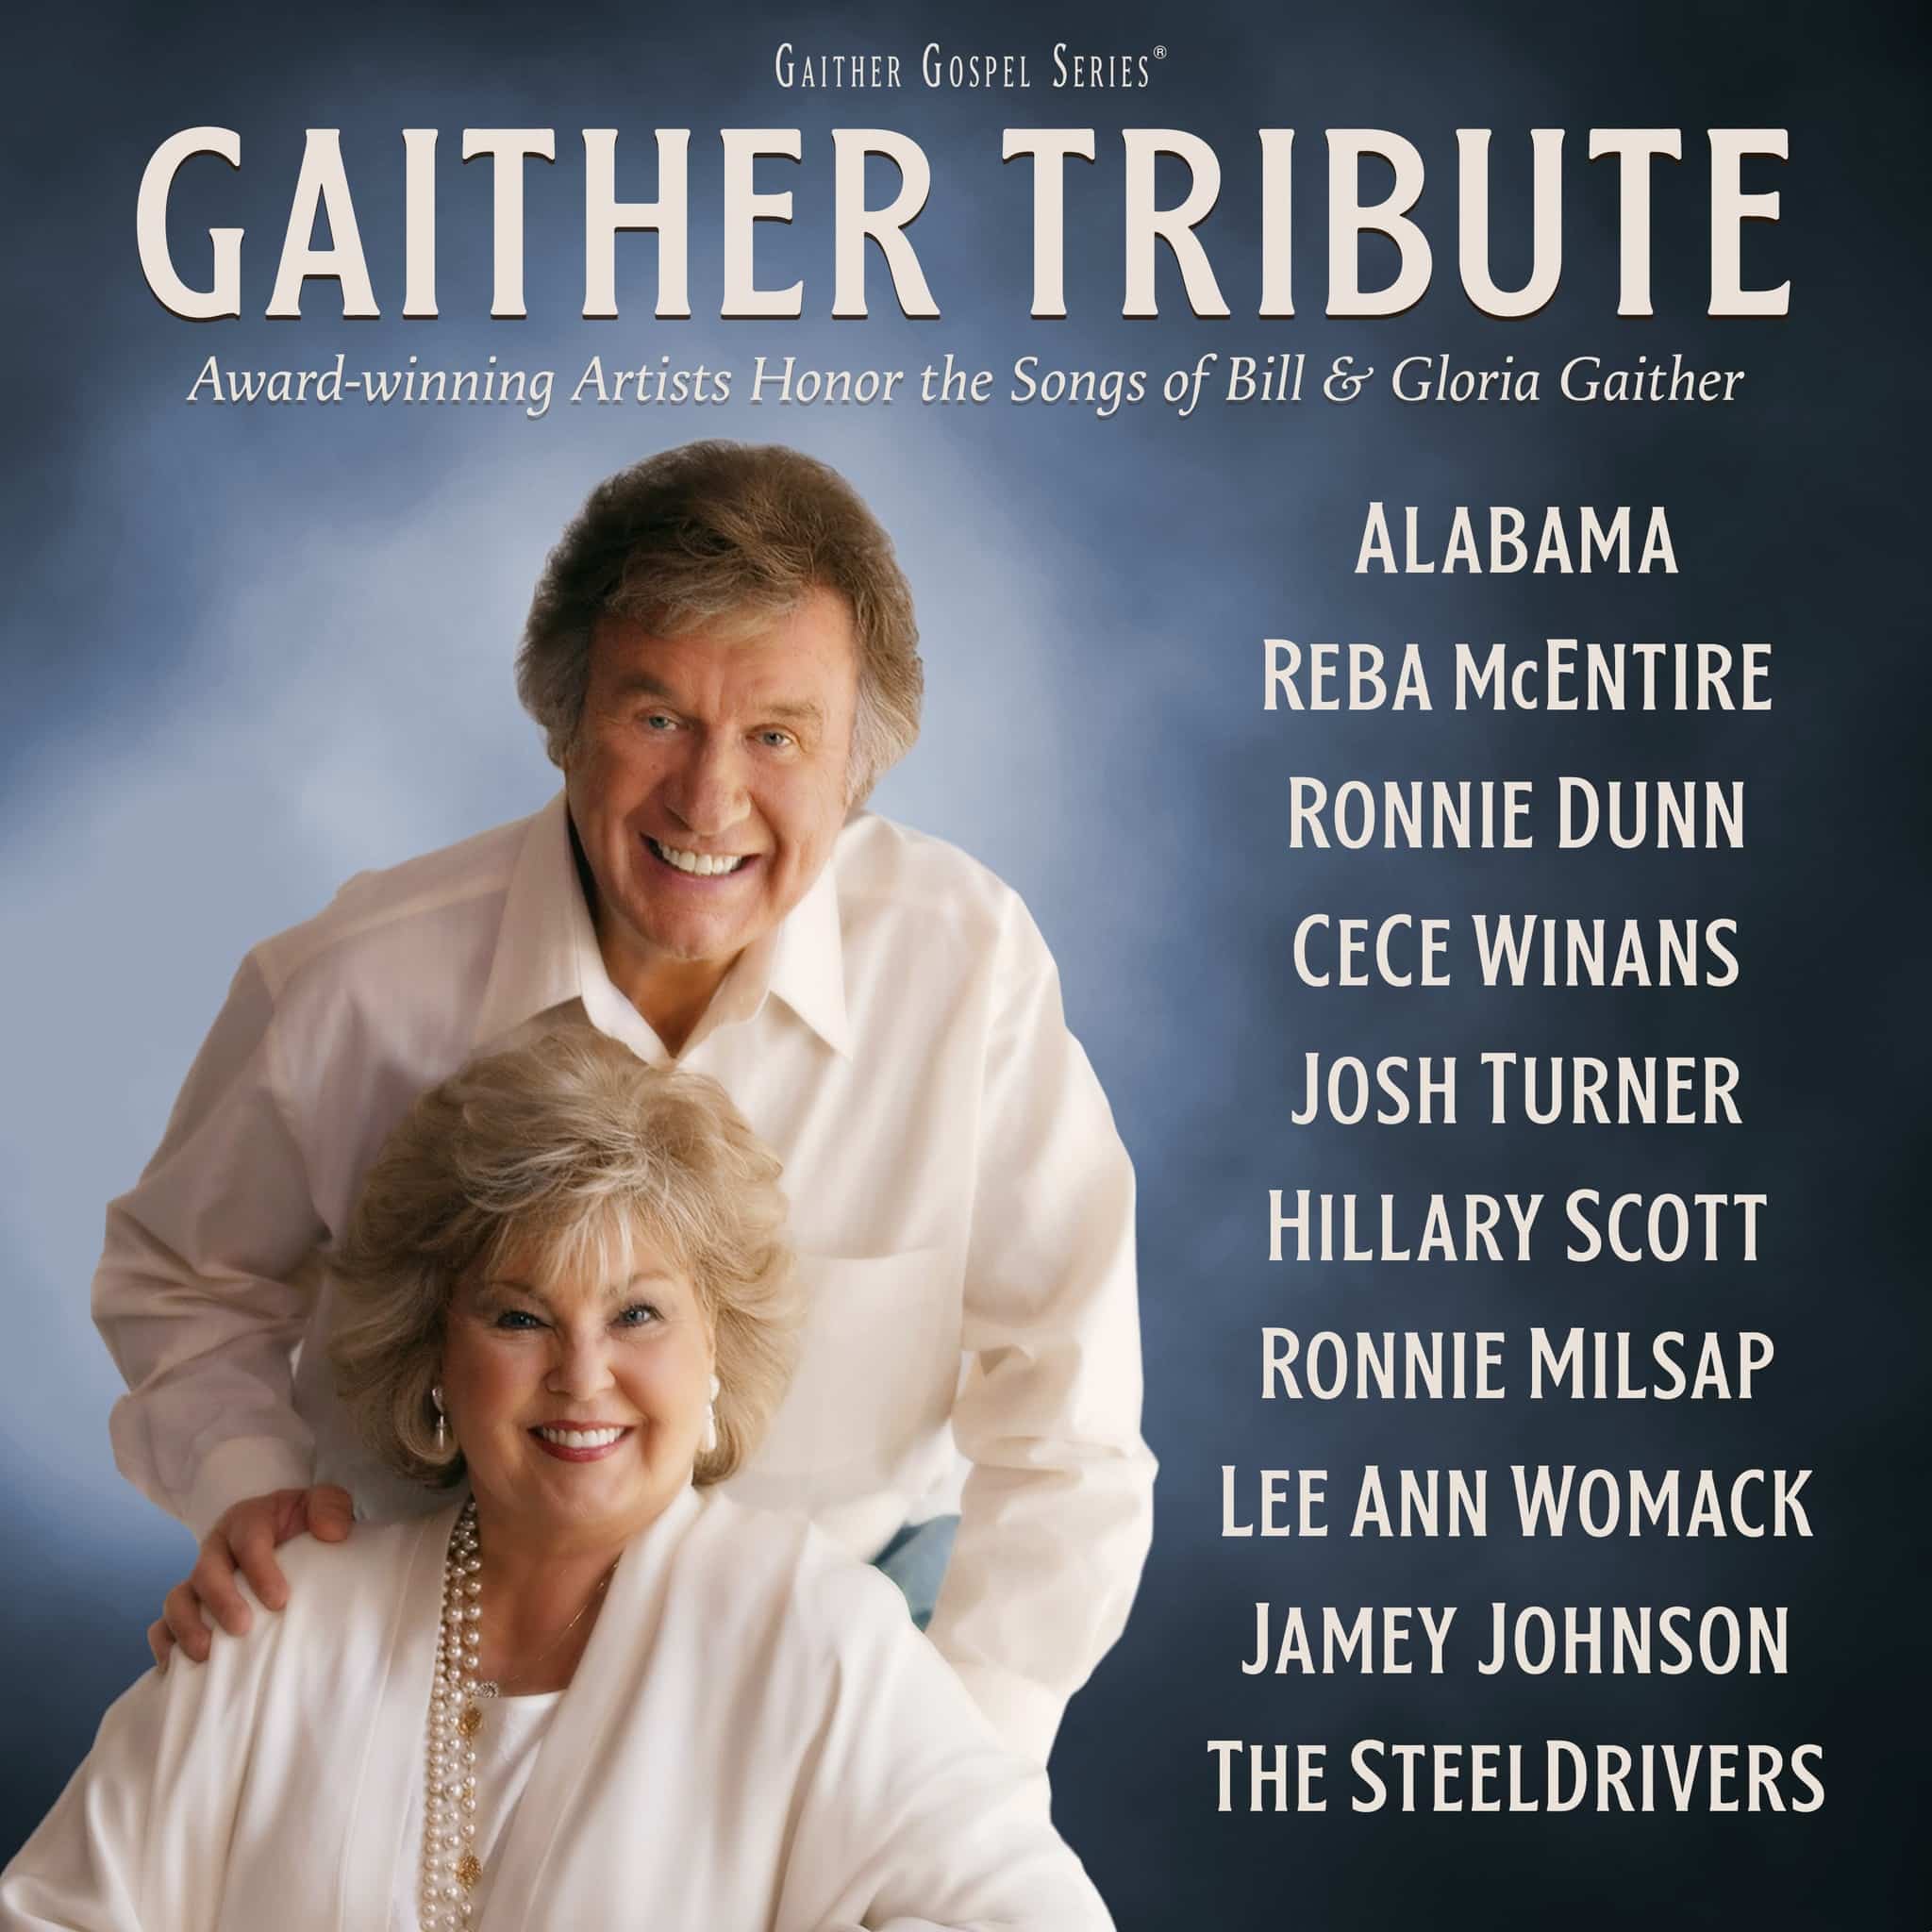 Cover art for the tribute album honoring Bill and Gloria Gaither